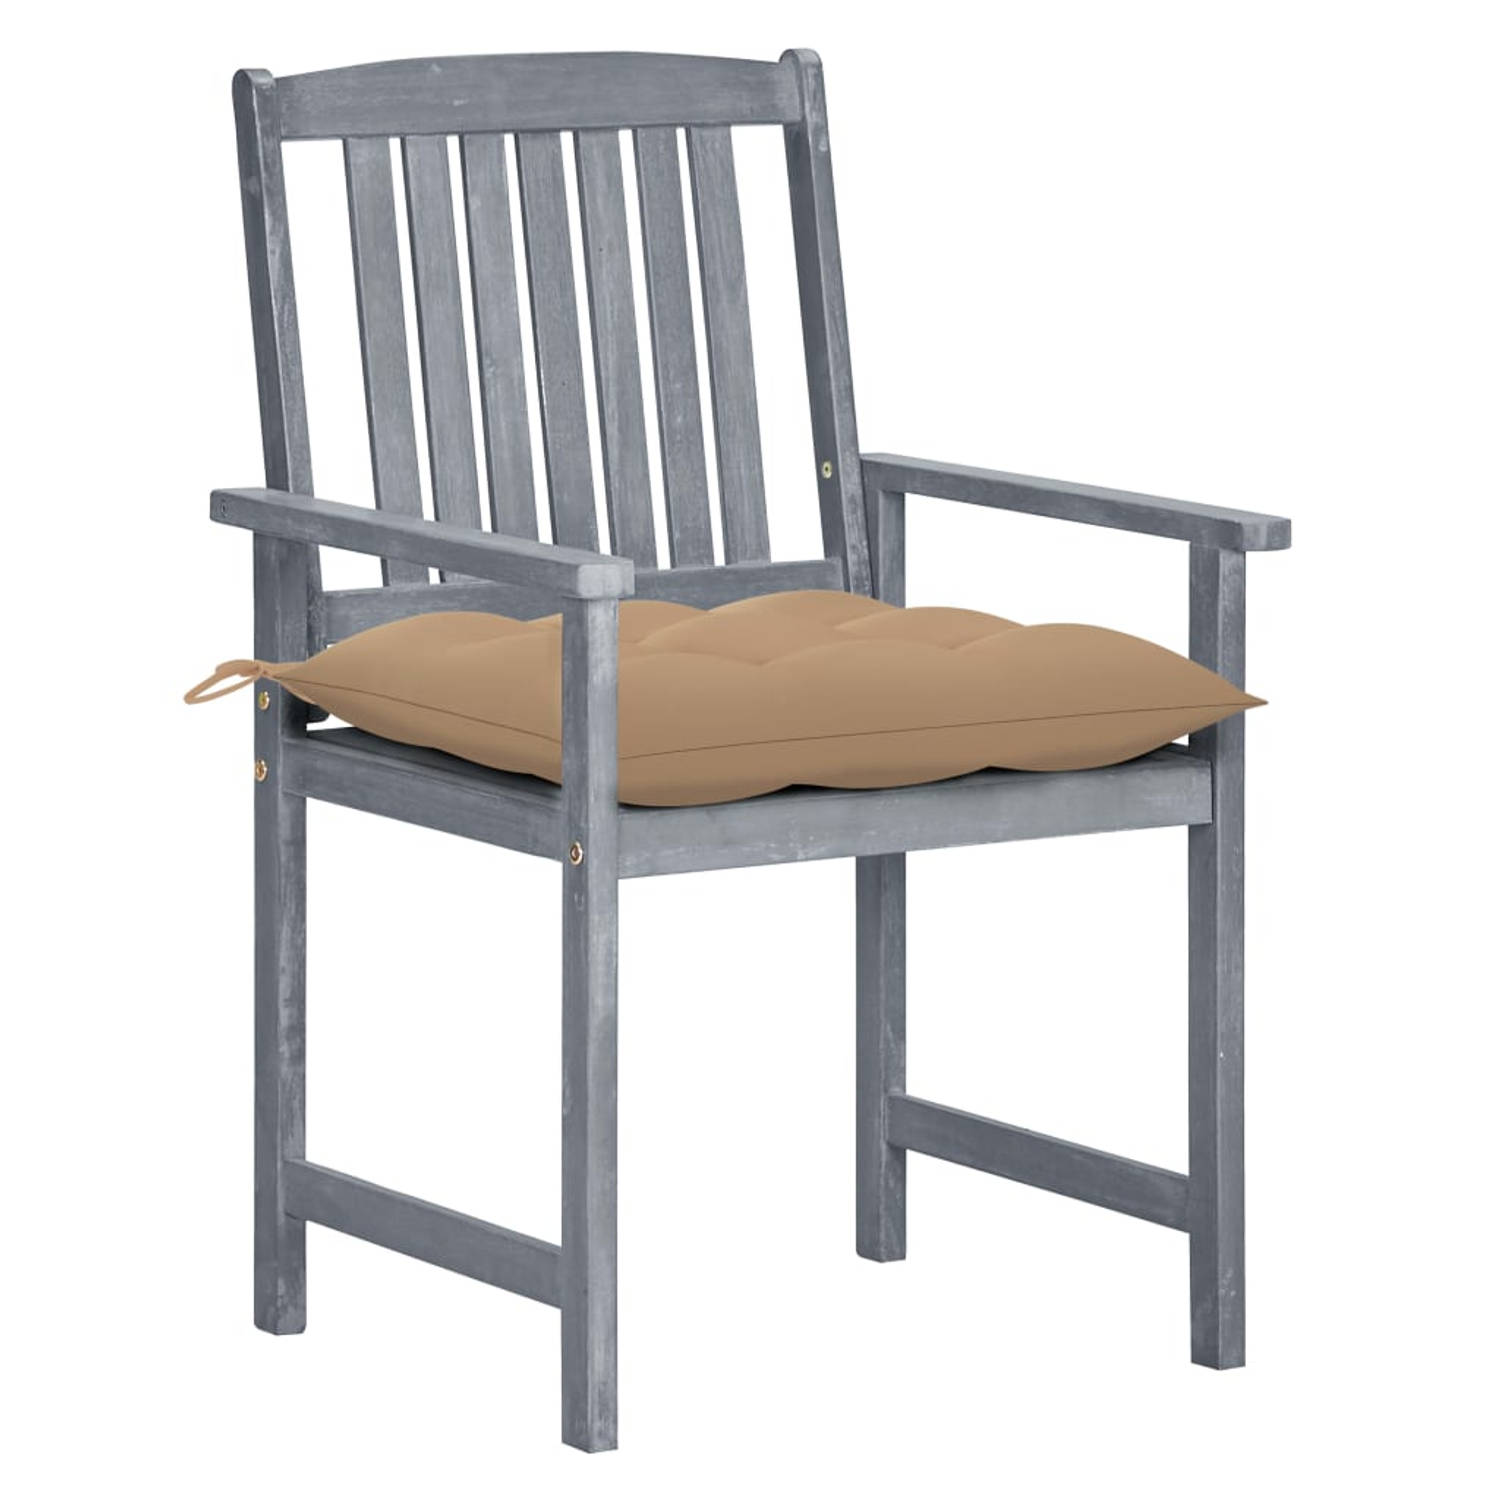 The Living Store Acacia Wooden Chair Set - Greywash - Sturdy - Weatherproof - 61 x 57 x 92 cm - Includes 8 Chairs - Cushions